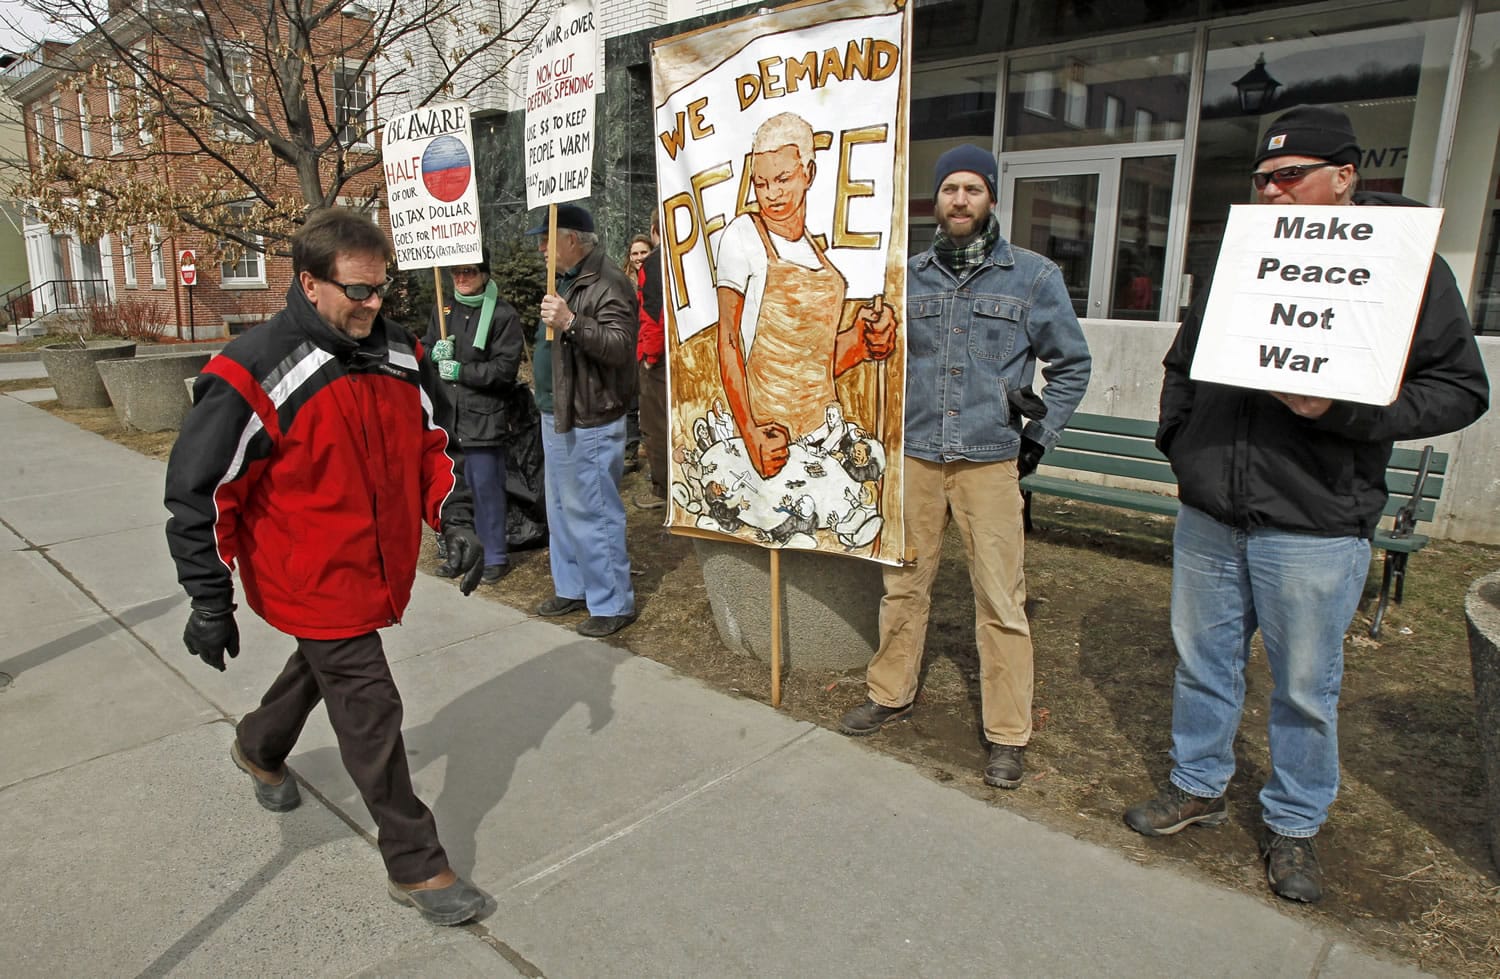 Protesters hold signs in front of the federal building in Montpelier, Vt., earlier this month.